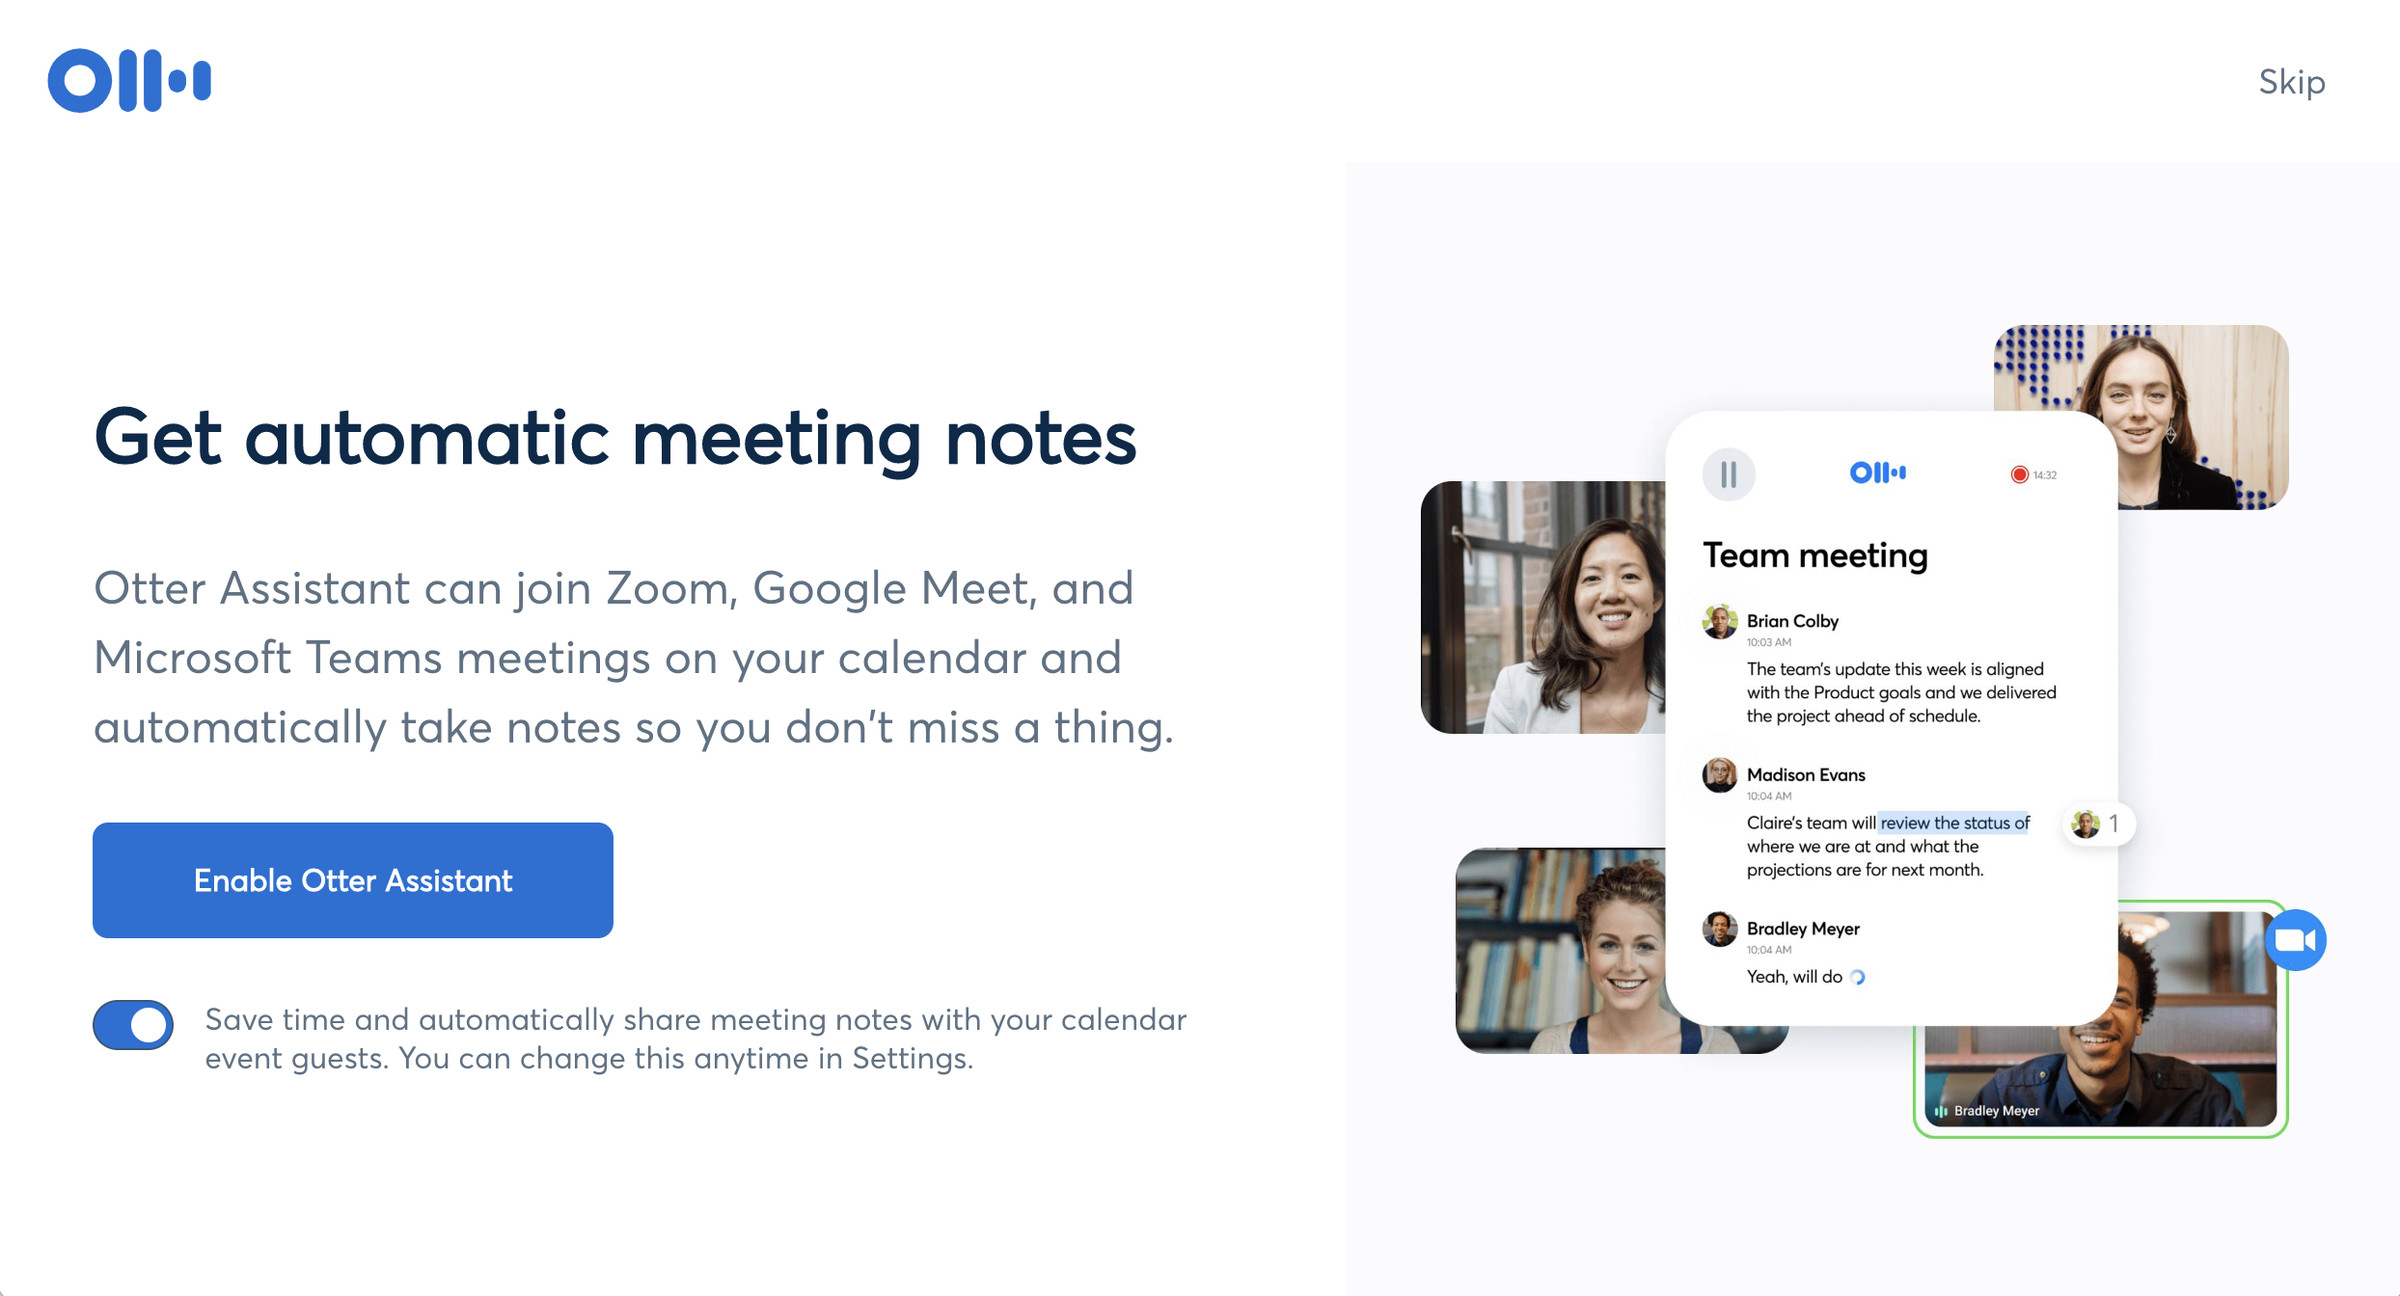 Page for the Otter app headed on the left side “Get automatic meeting notes” with a blue button “Enable Otter Assistant,” some explanatory text, and an illustration showing transcribed text and photos of people on the right.